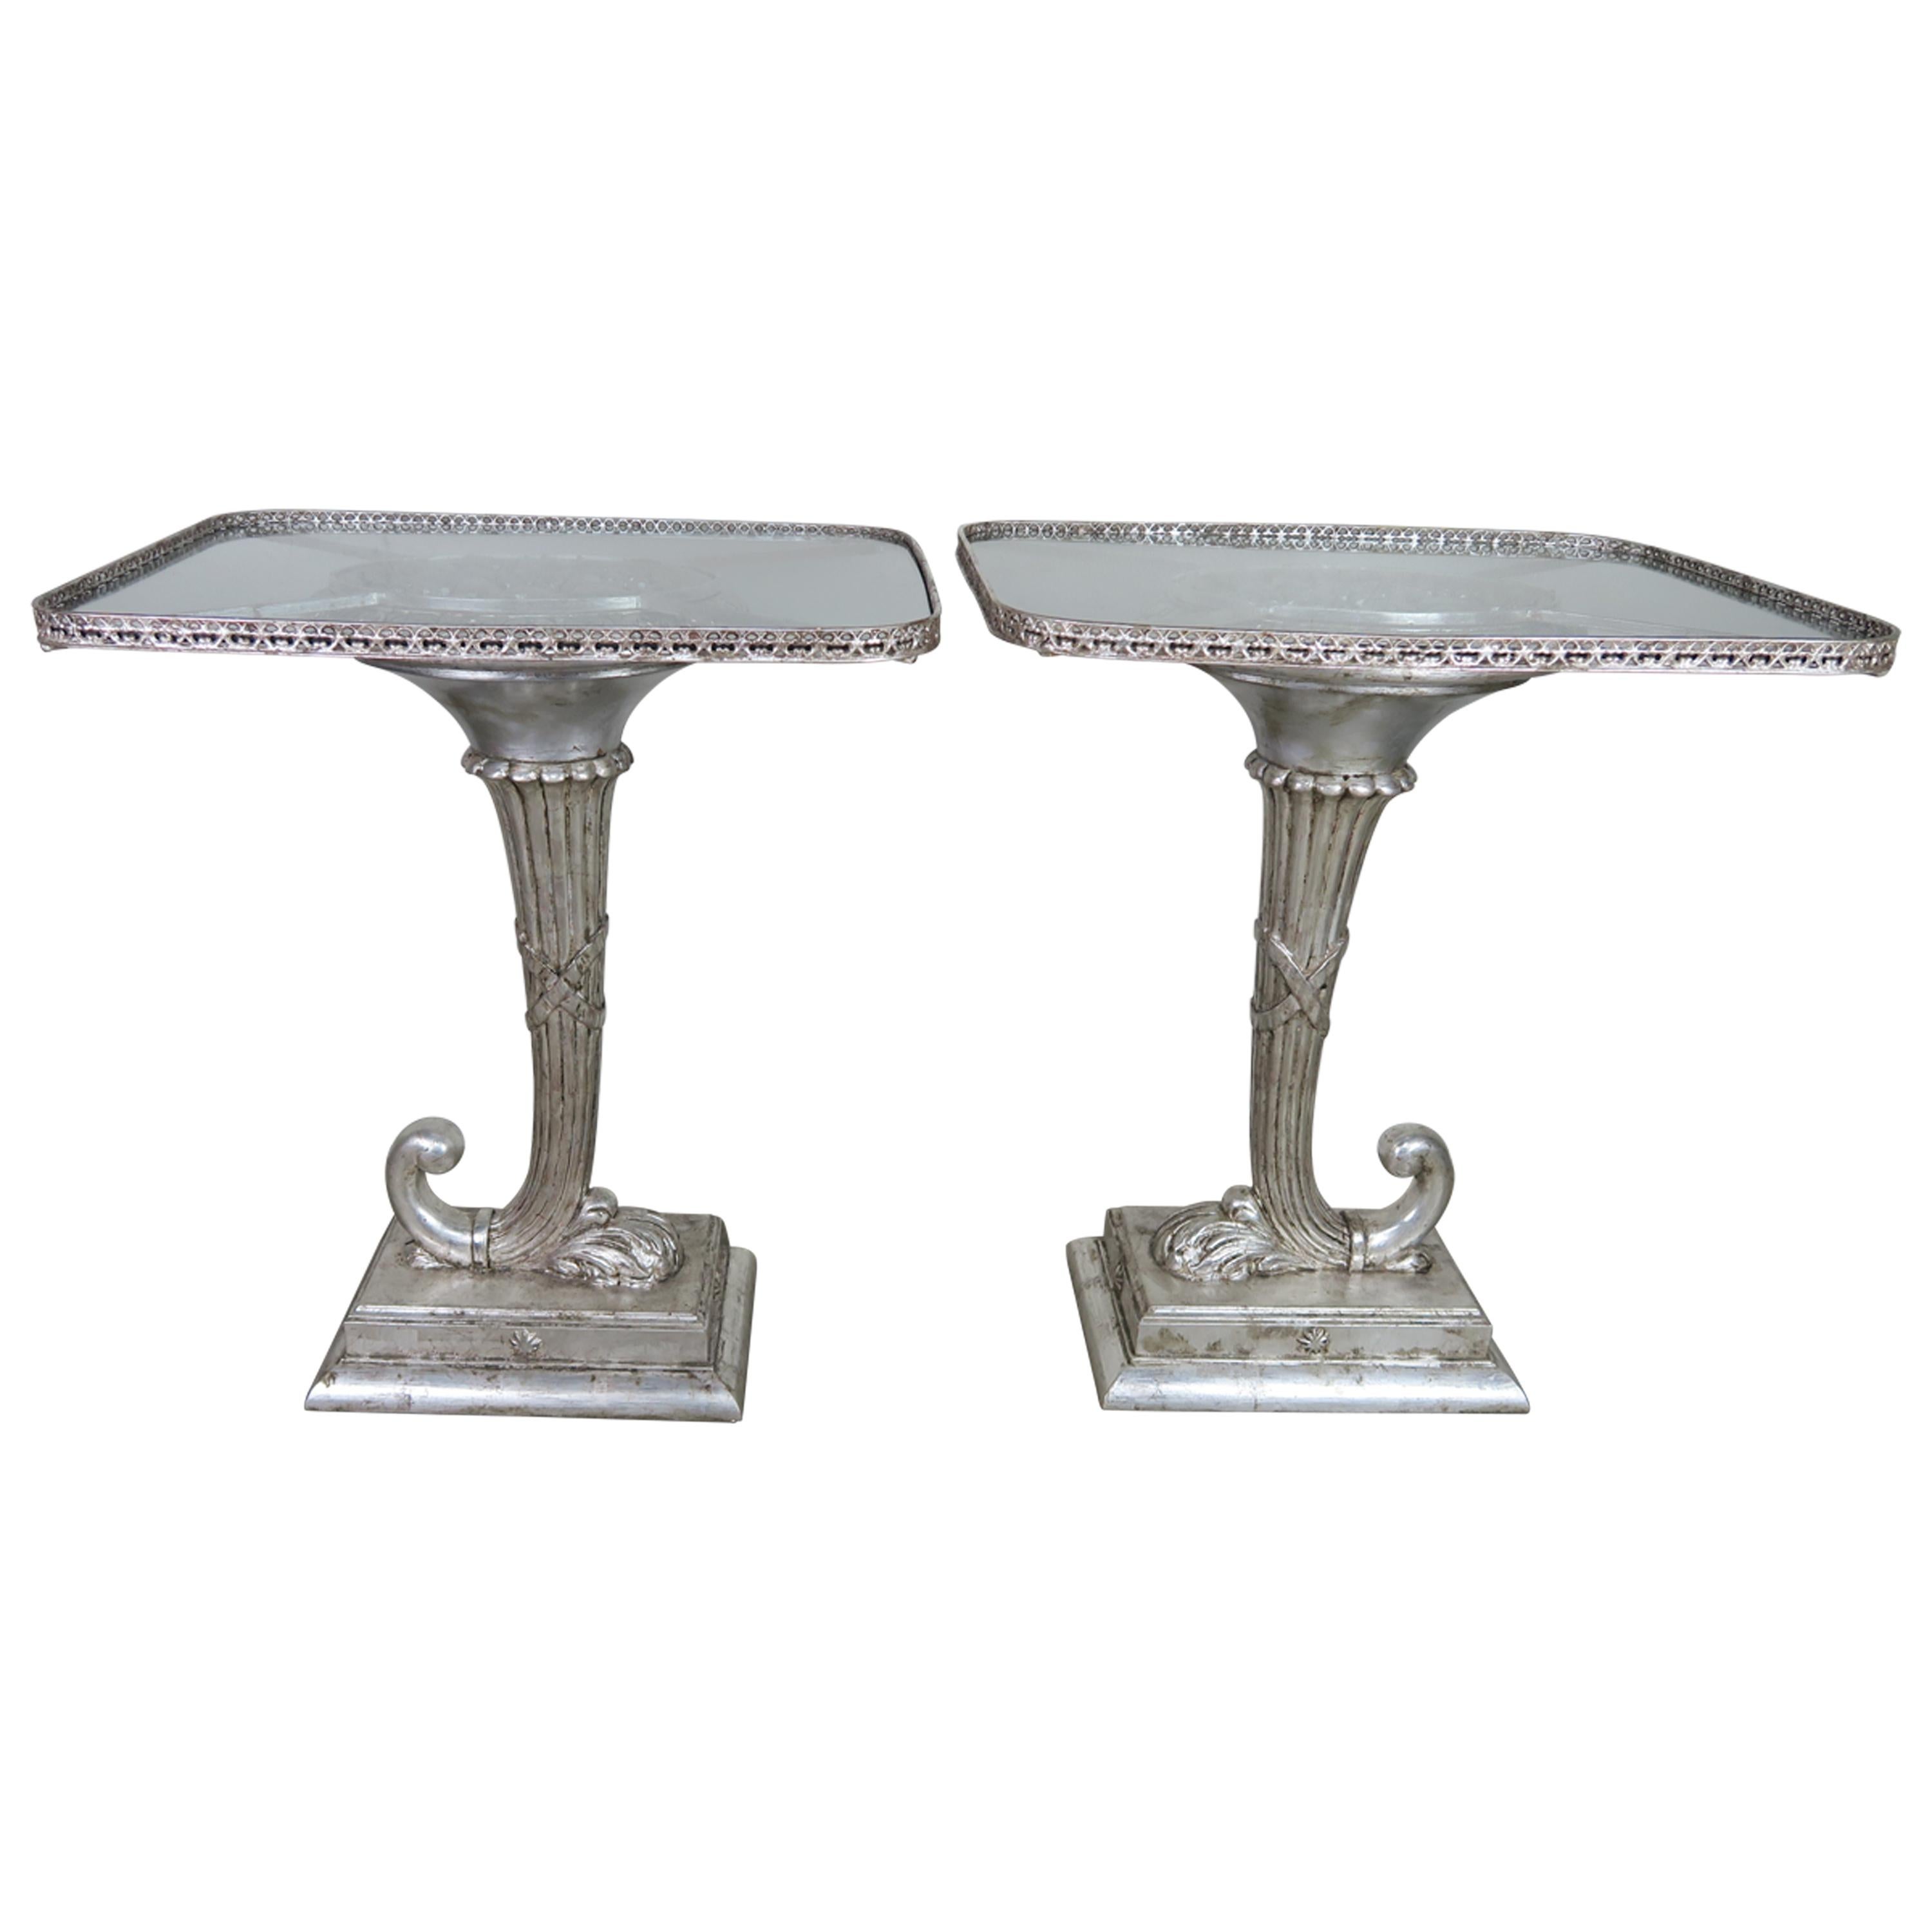 Pair of Neoclassical Style Cornucopia Silver Gilt Side Tables